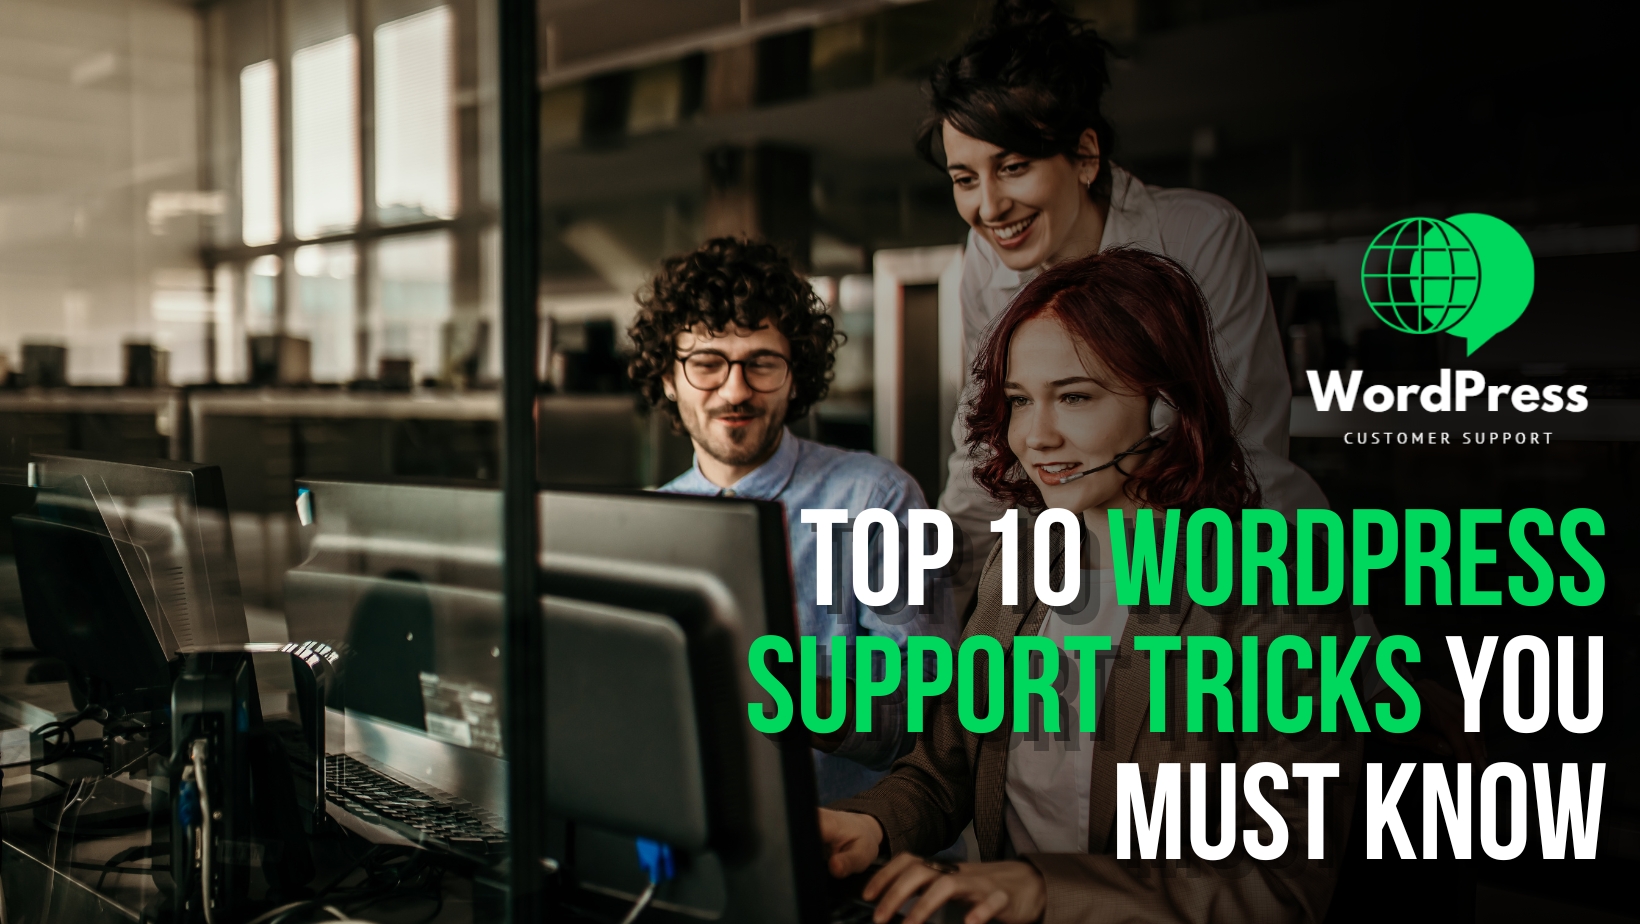 Top 10 WordPress Support Tricks You Must Know